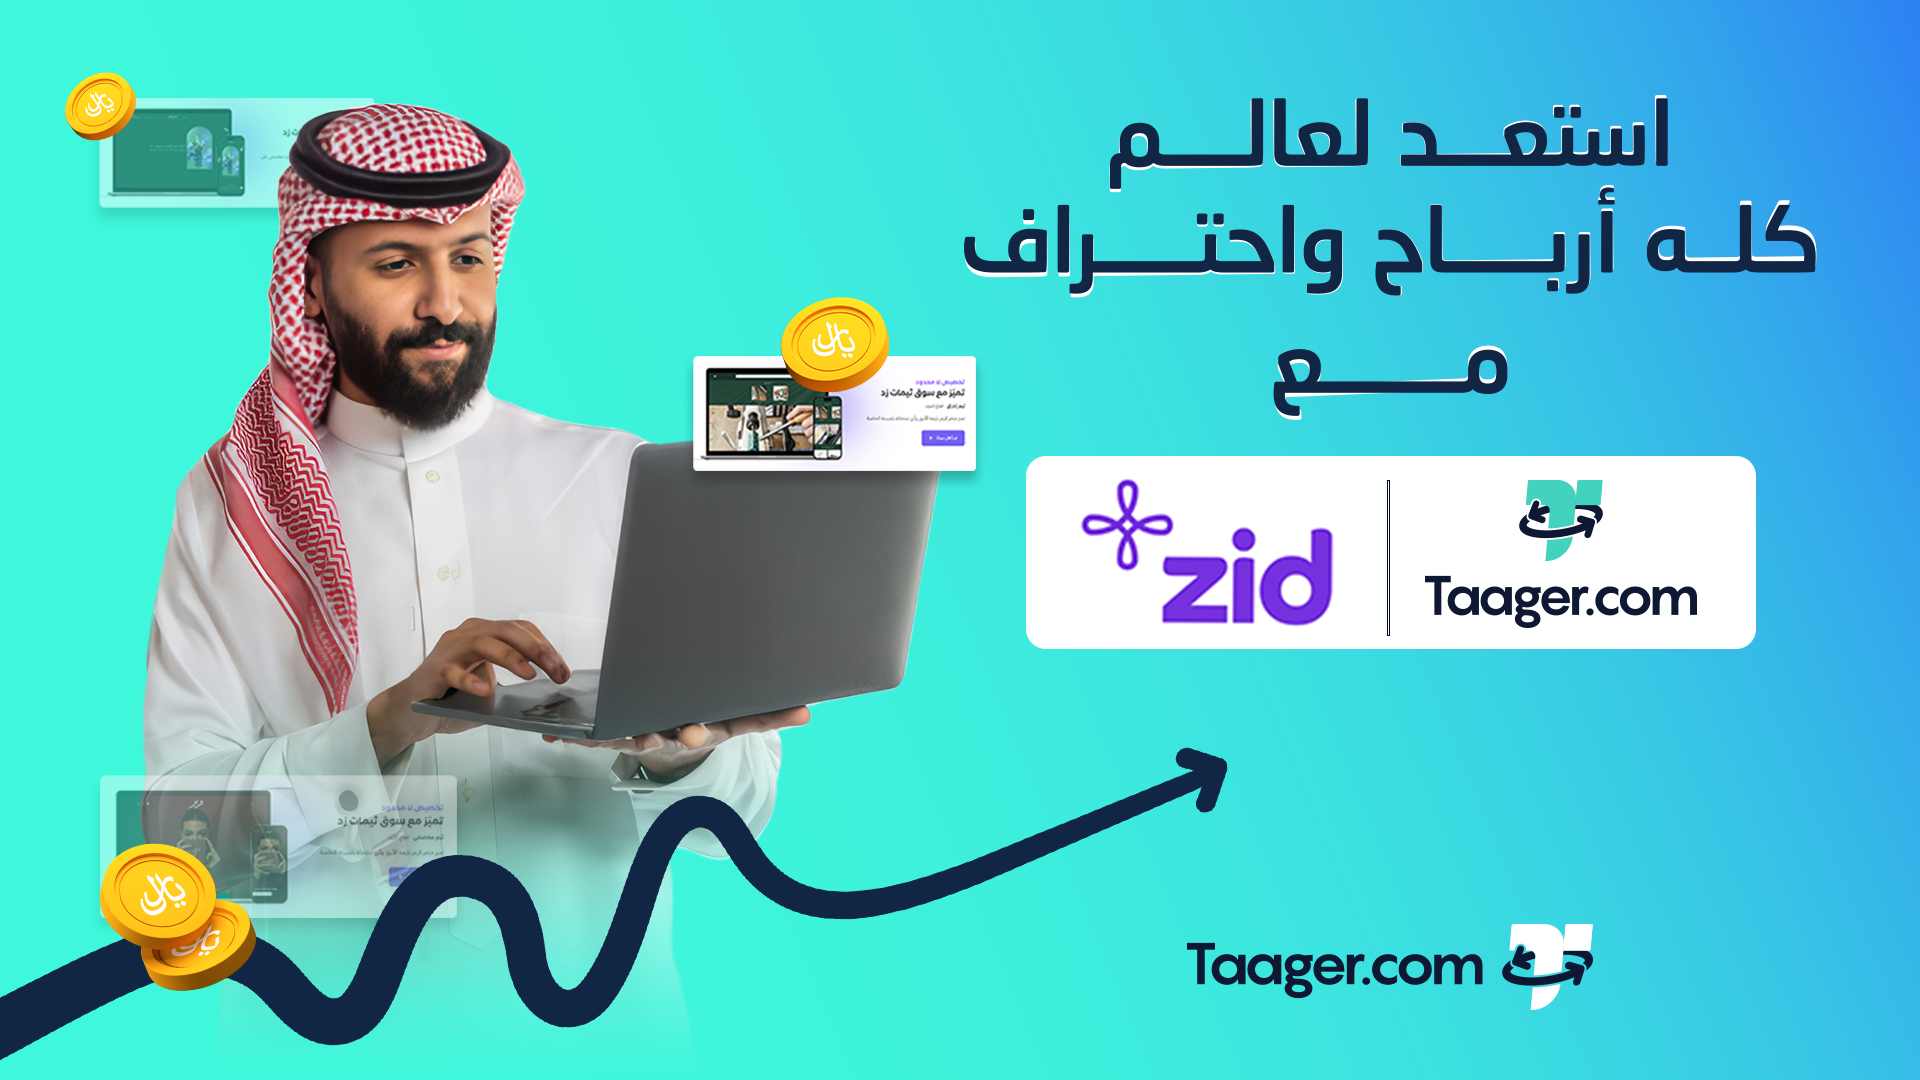 Transform your e-commerce journey into a breeze with Taager
Just subscribe to one of Zid's paid packages to enjoy all the features.